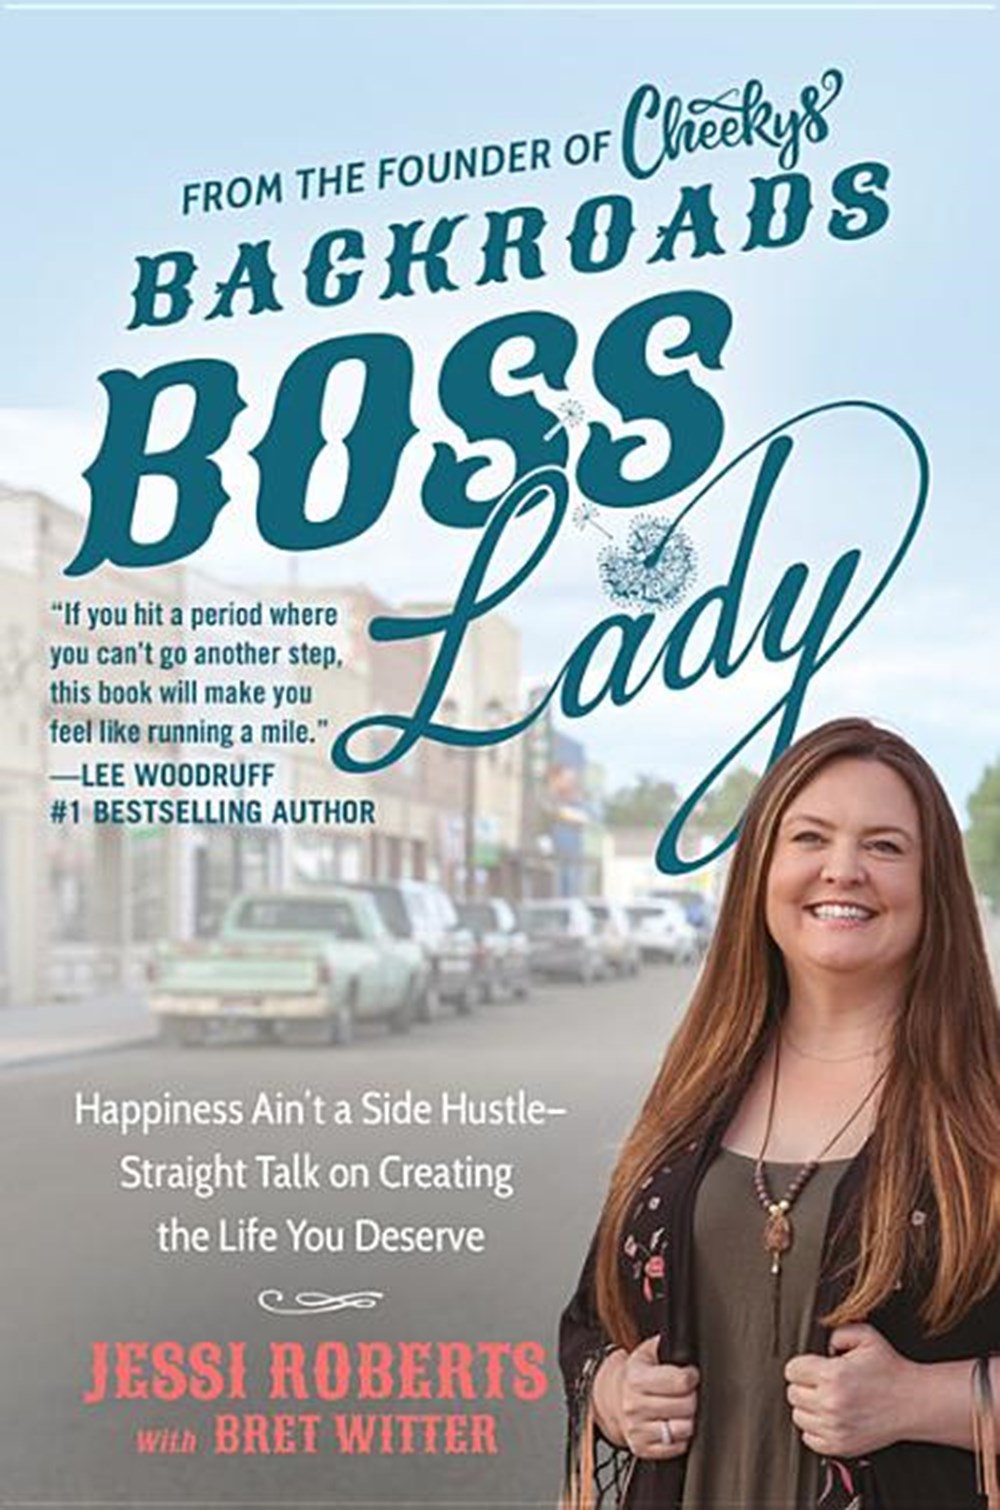 Backroads Boss Lady Happiness Ain't a Side Hustle--Straight Talk on Creating the Life You Deserve